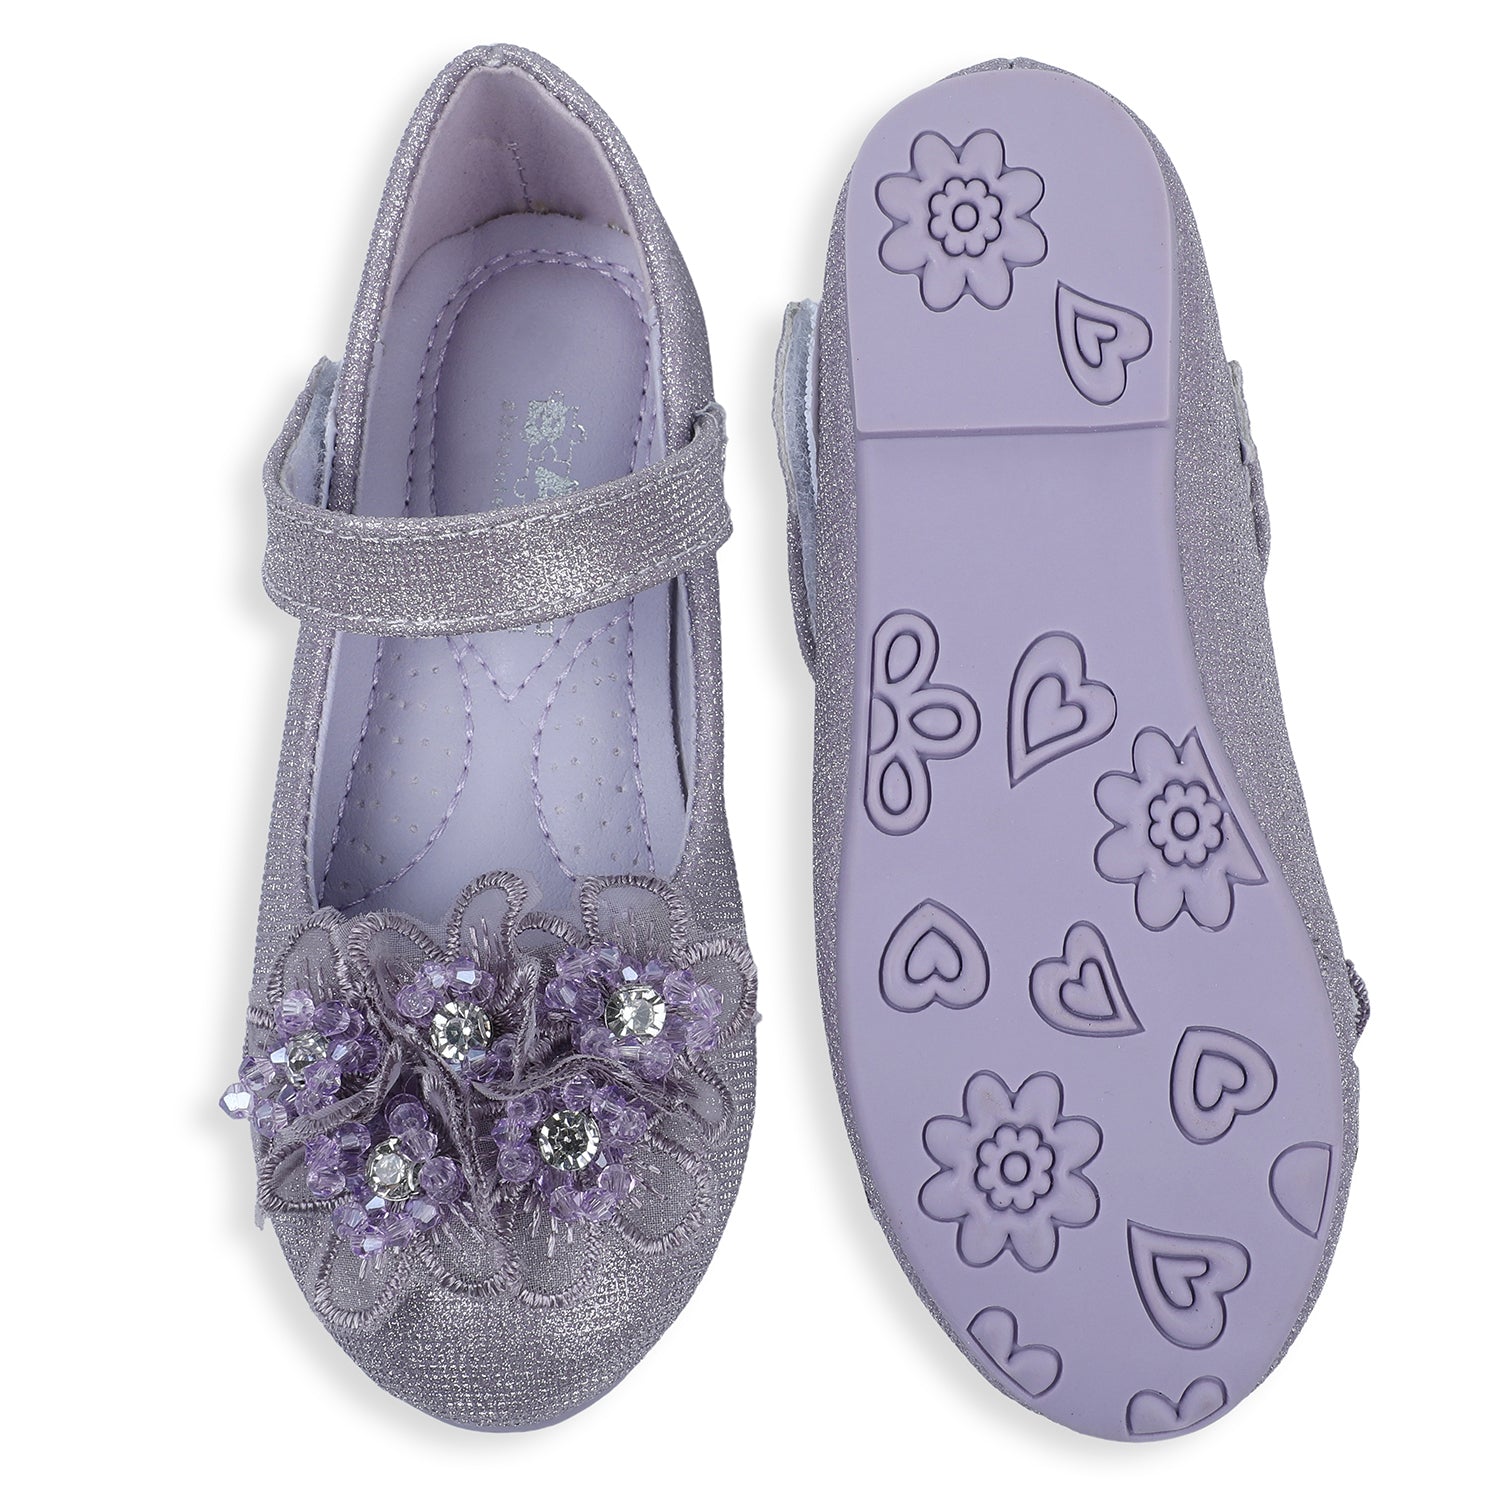 Baby Moo x Bash Kids 3D Floral Party Mary Jane Ballerinas - Purple